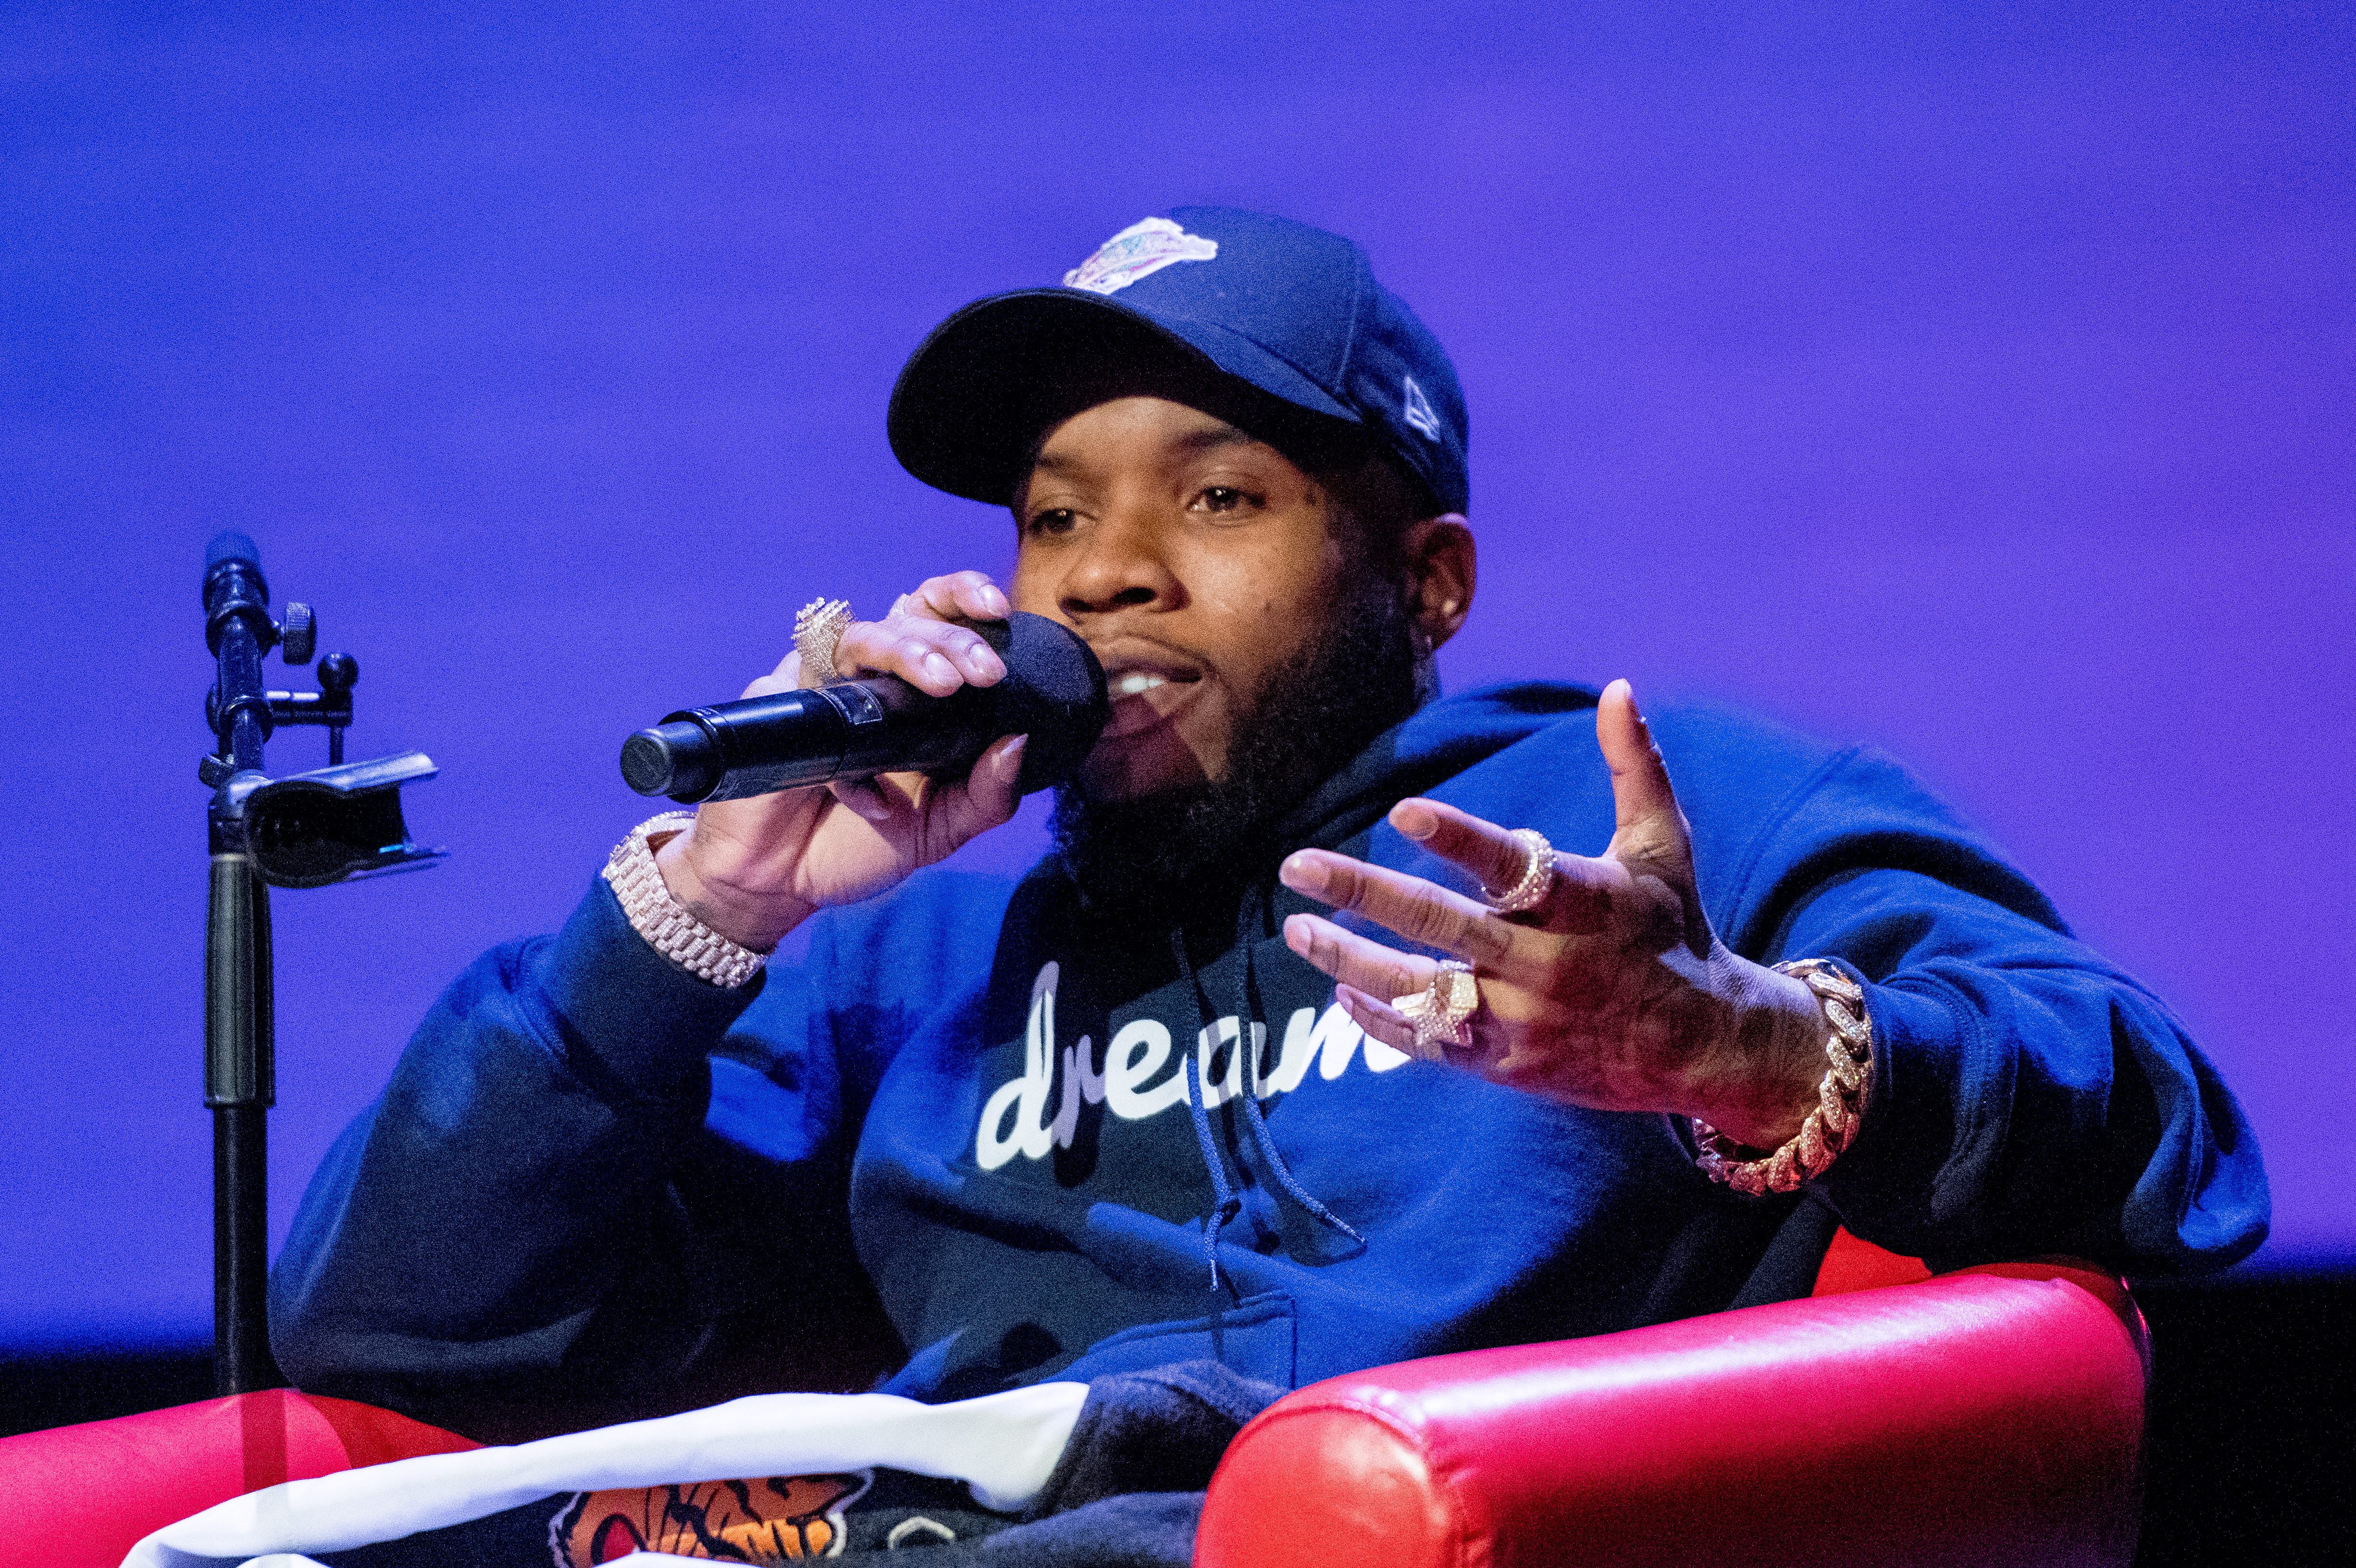 Tory Lanez Detained At Las Vegas Airport For Carrying Weed: Report